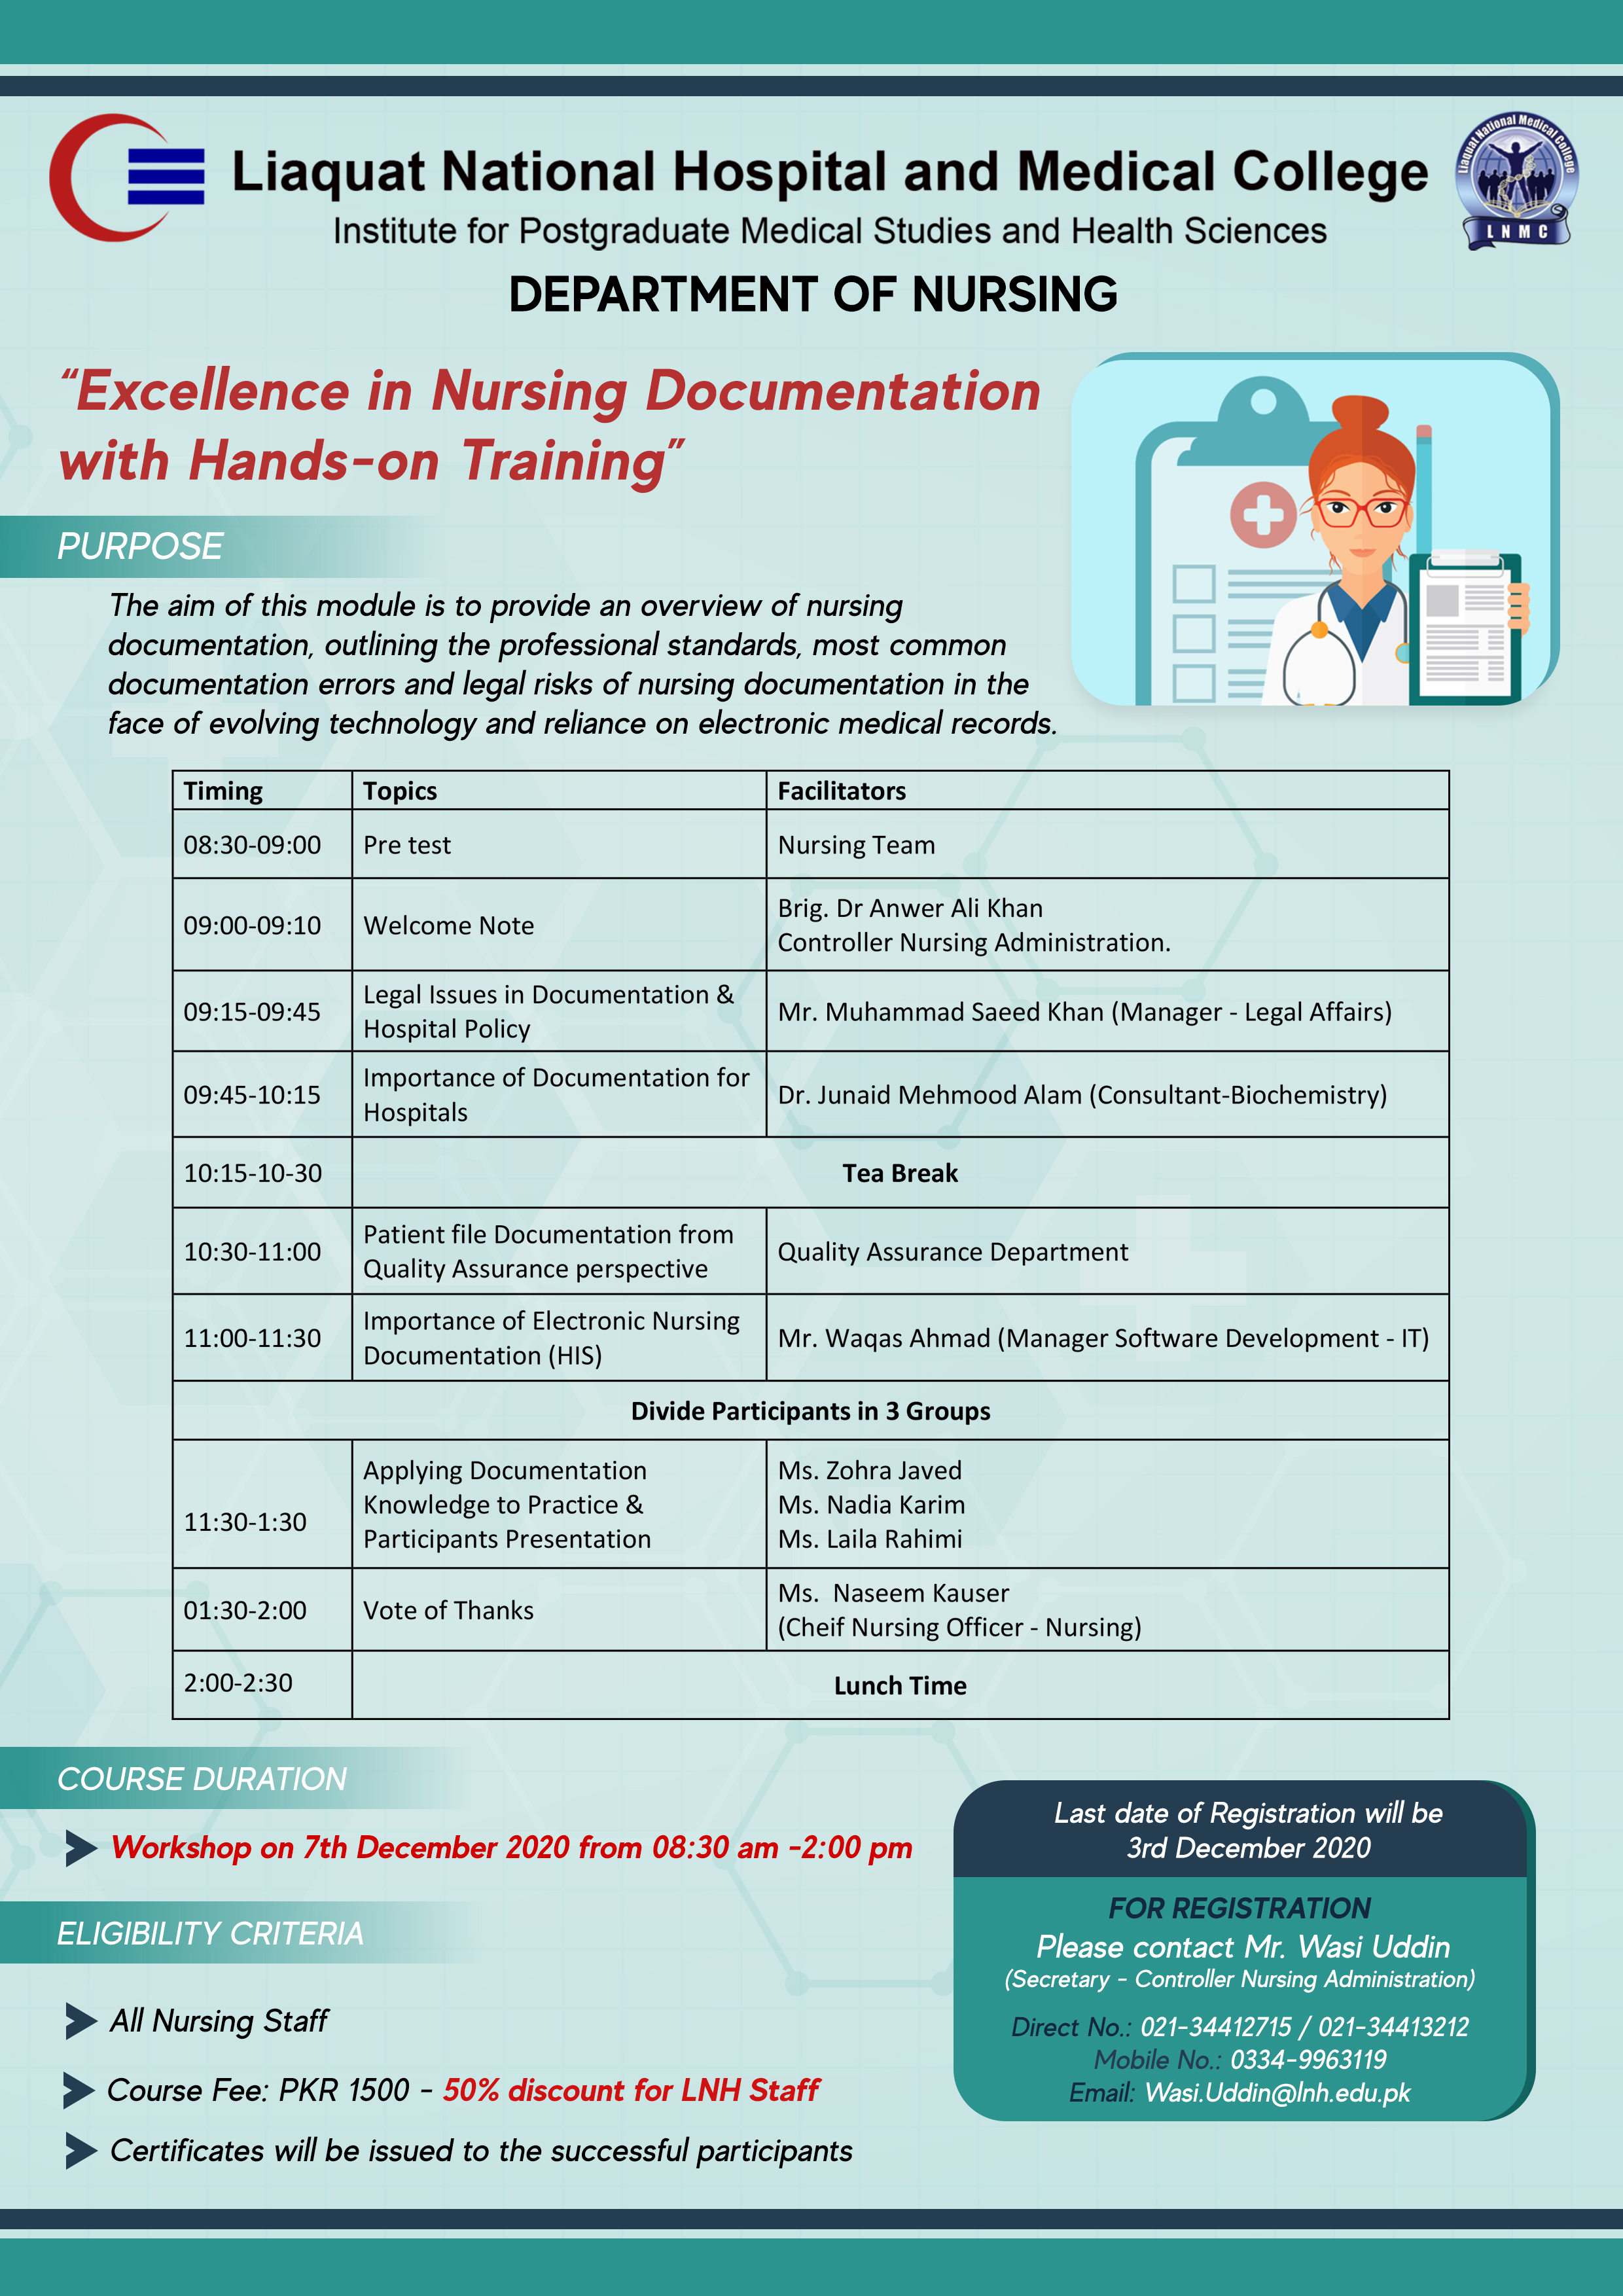 Workshop on: Excellence in Nursing Documentation with Hands-on Training